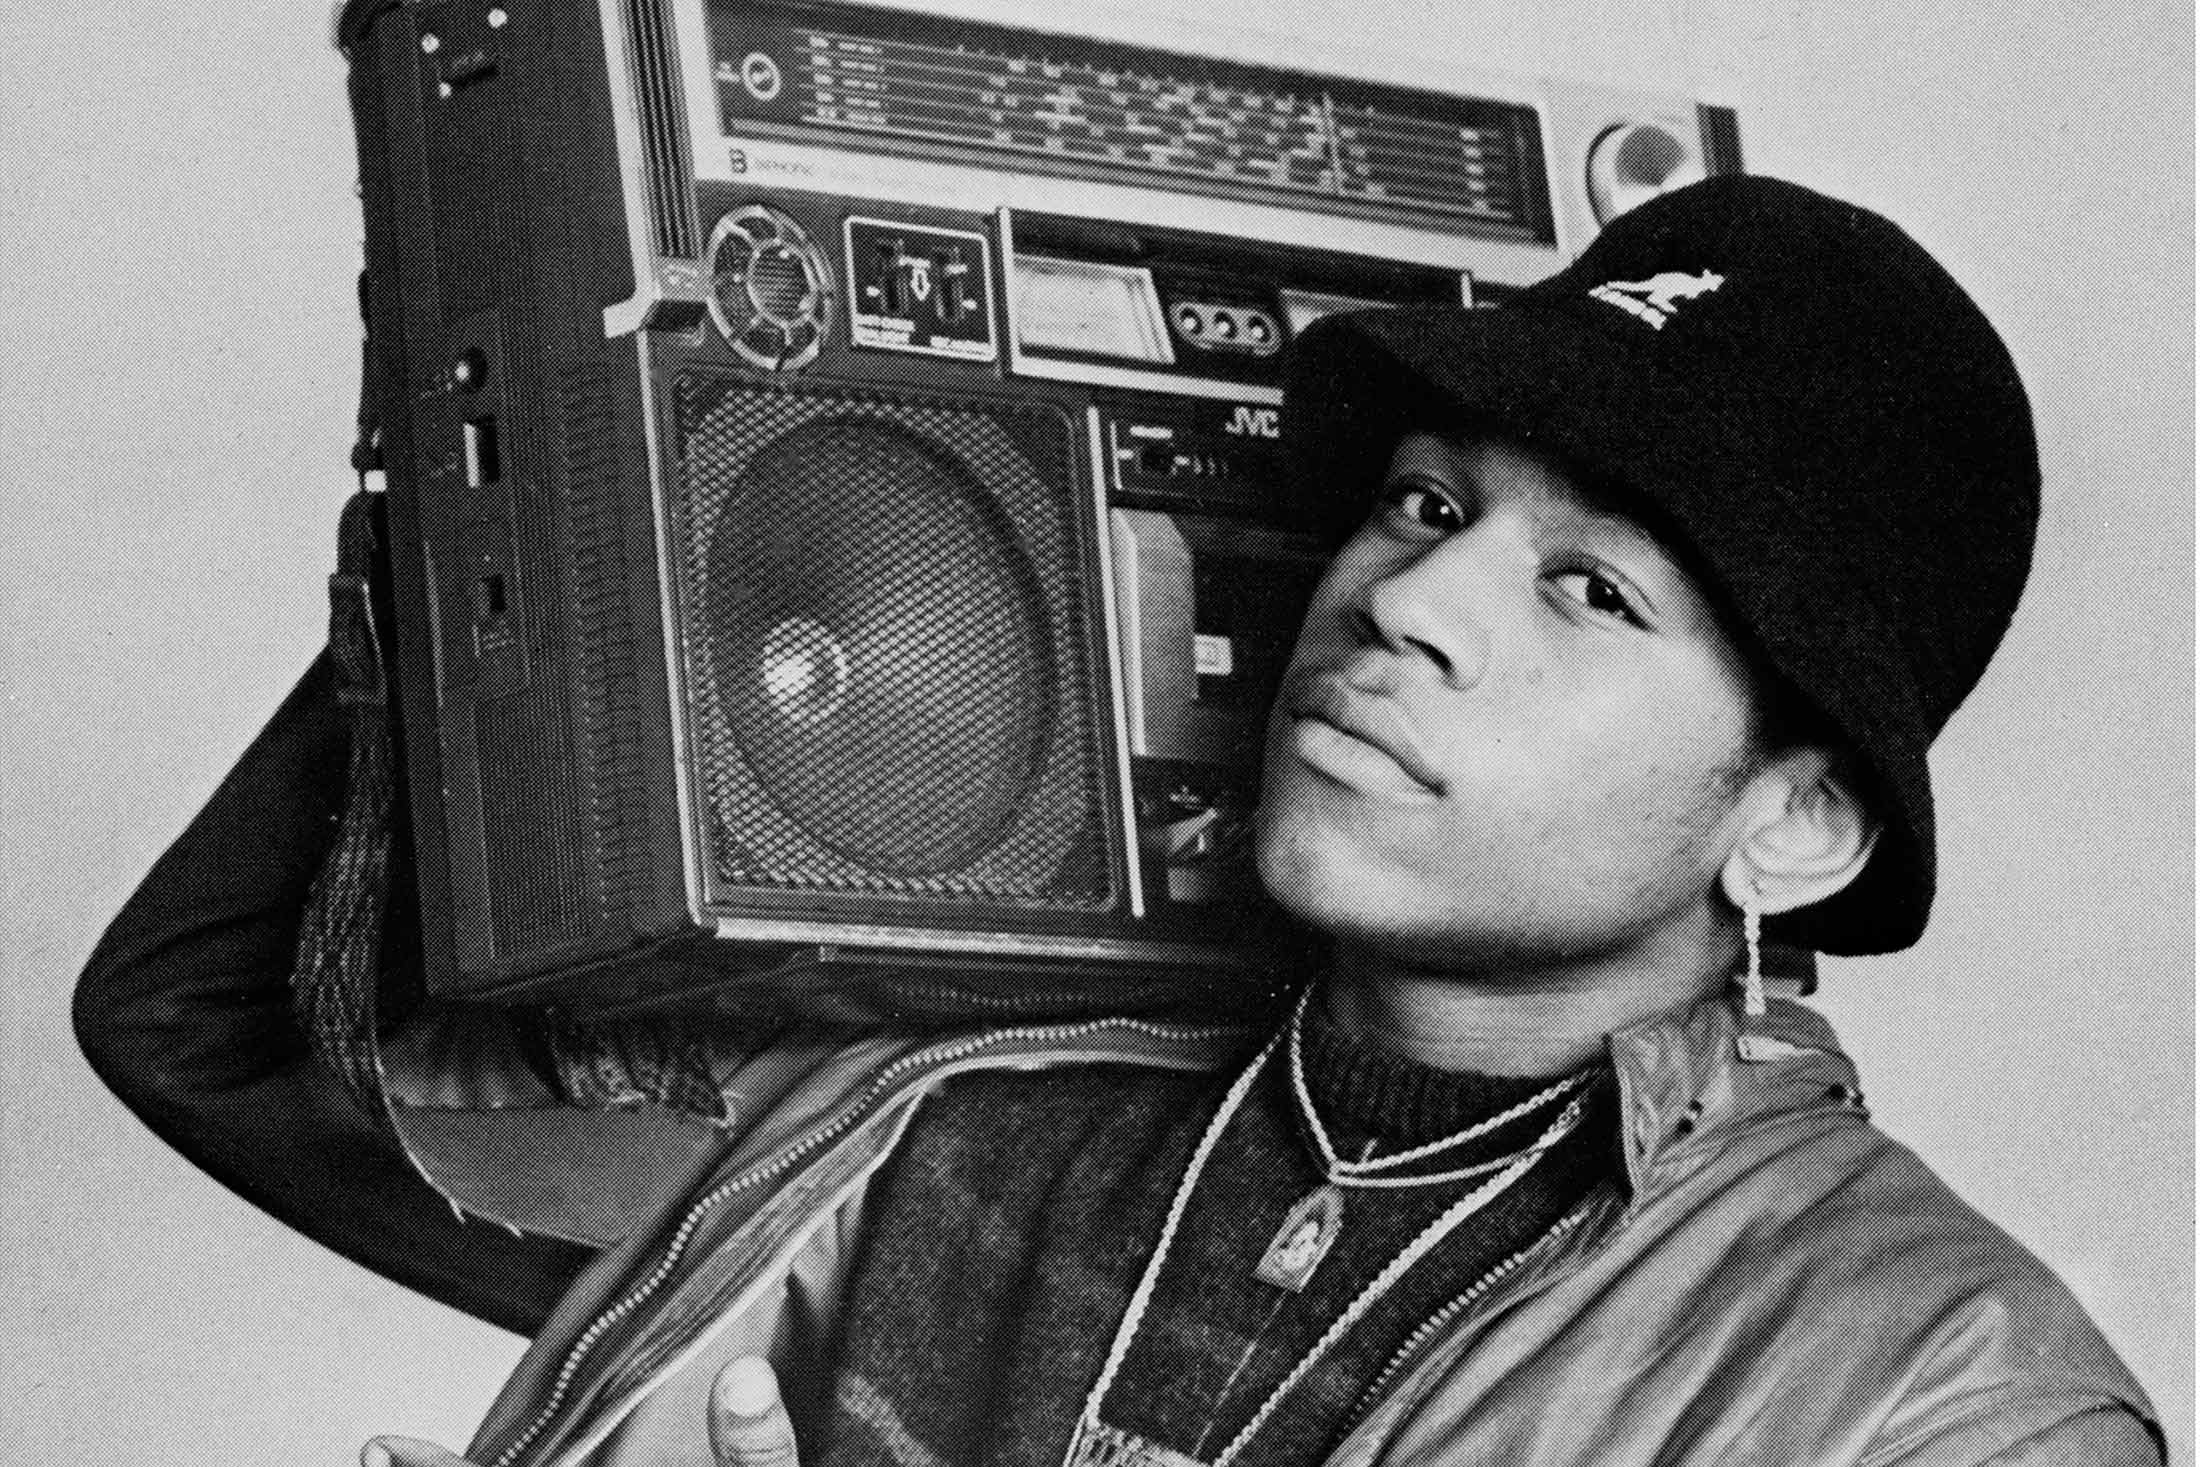 Fine Art in Rap Music: LL Cool J, ca. 1985. Photograph by Janette Beckman via Bloombrg.